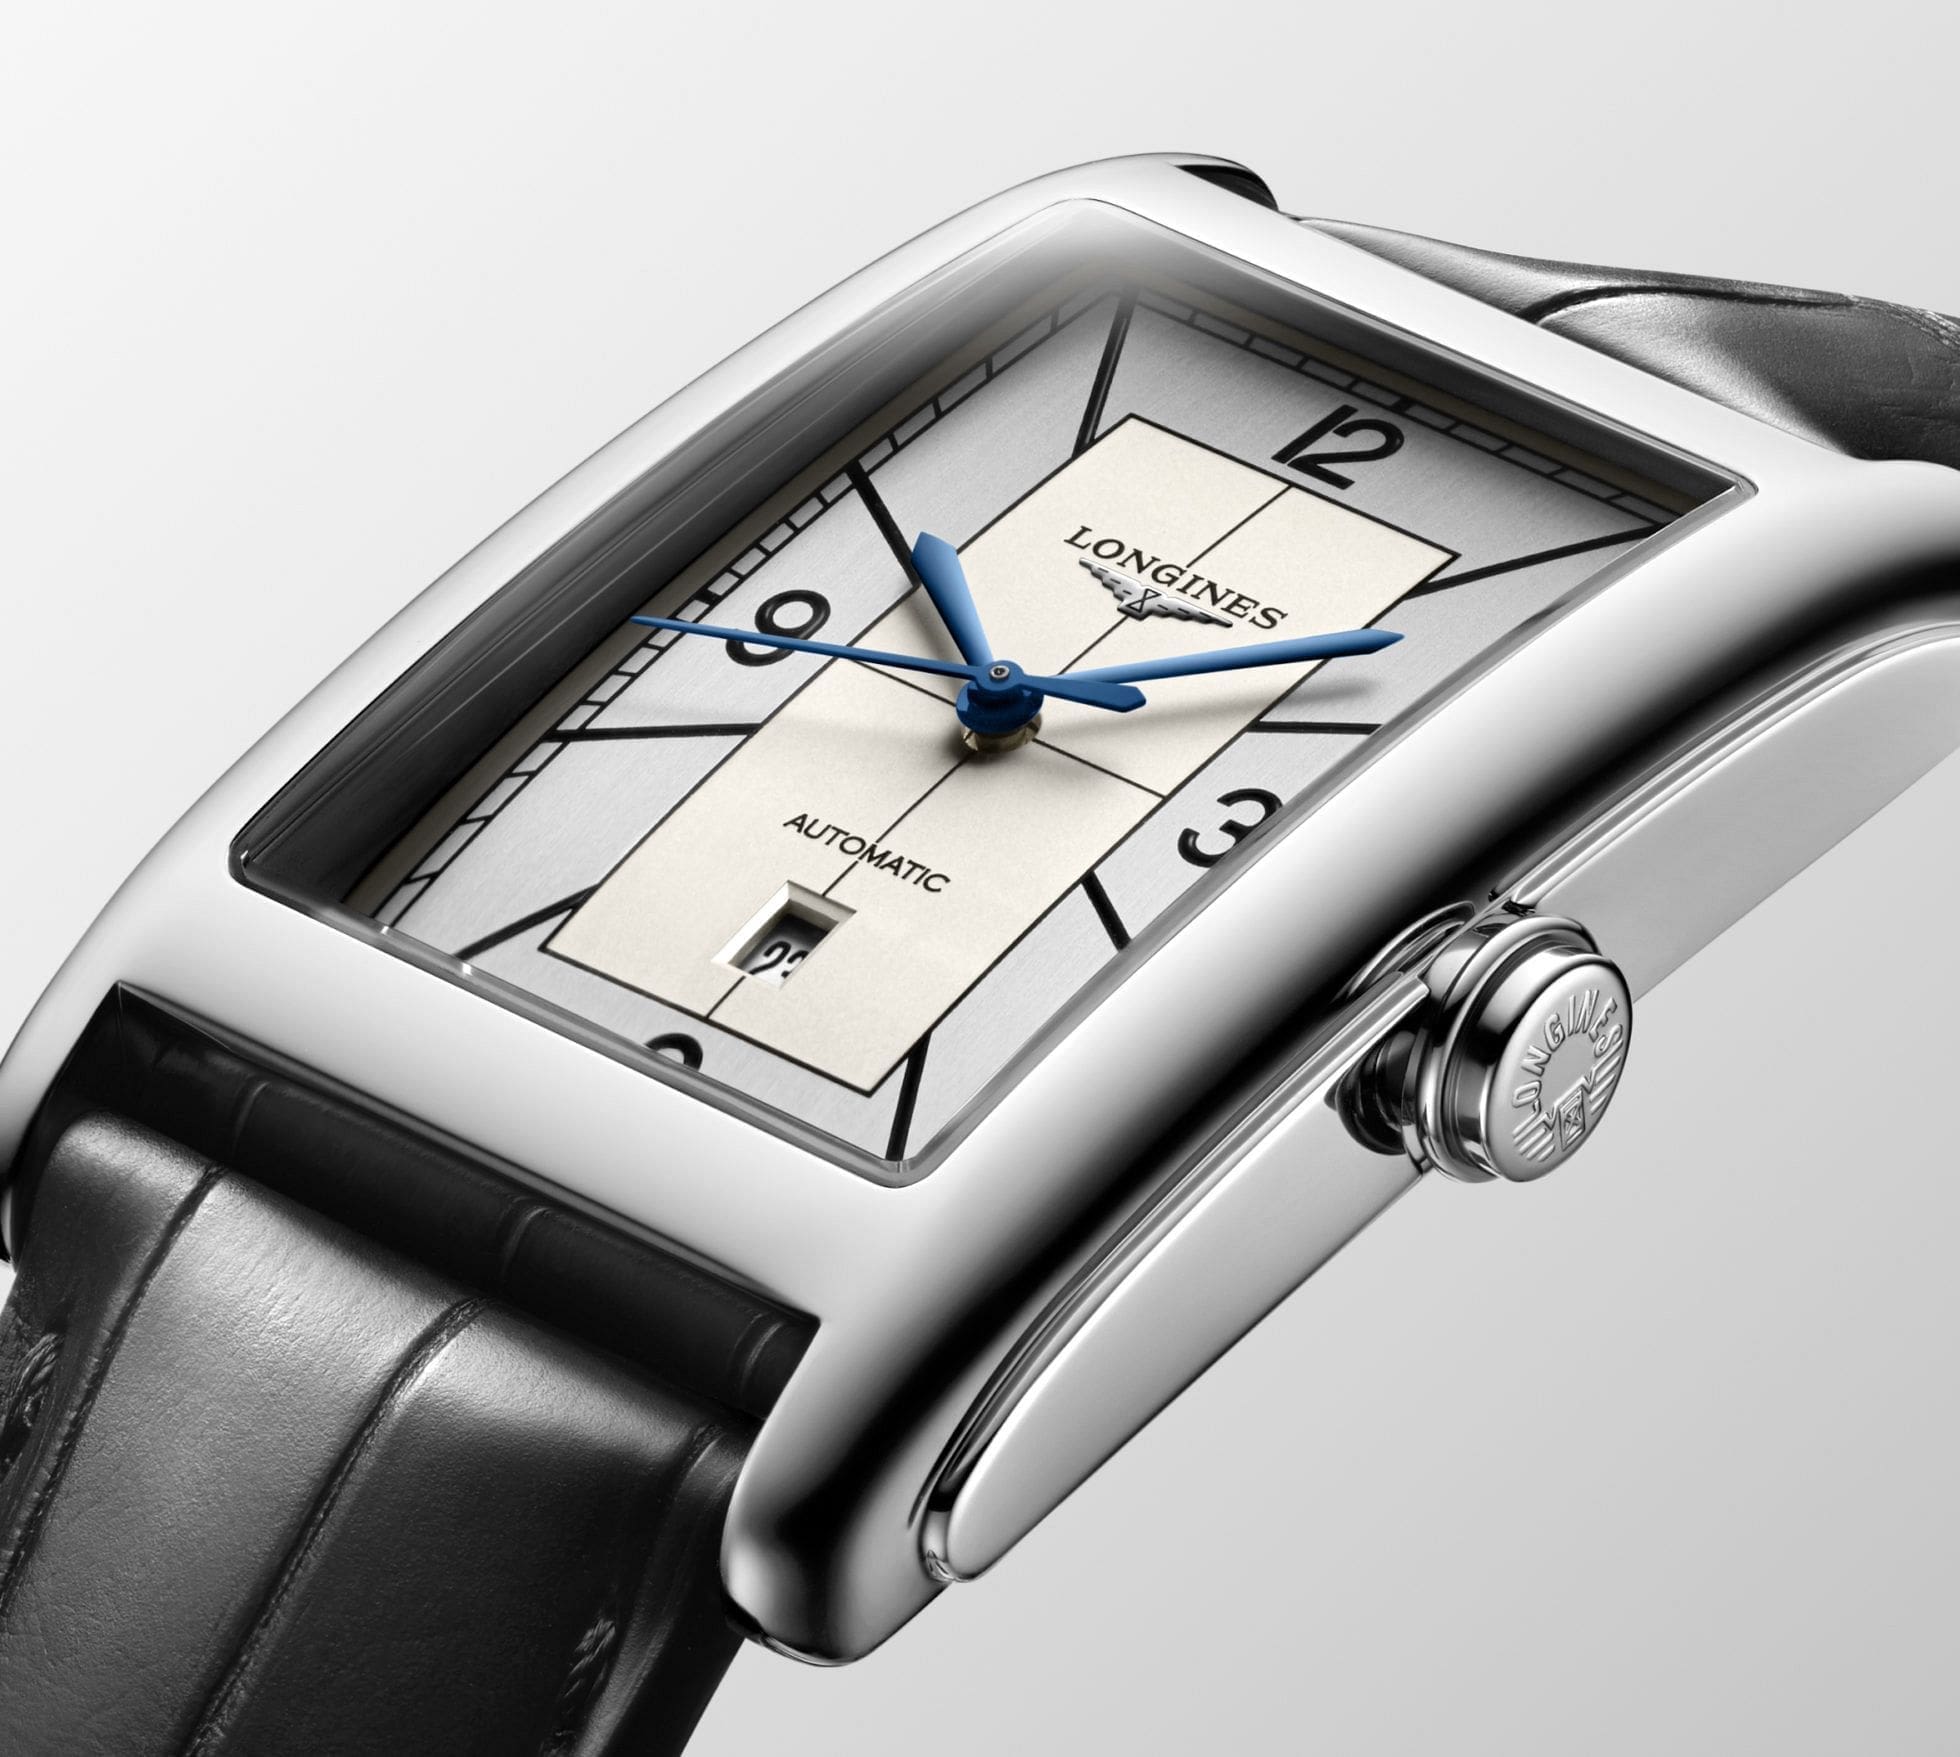 There’s a new Tank in town: The Longines DolceVita adds sector dials to its range